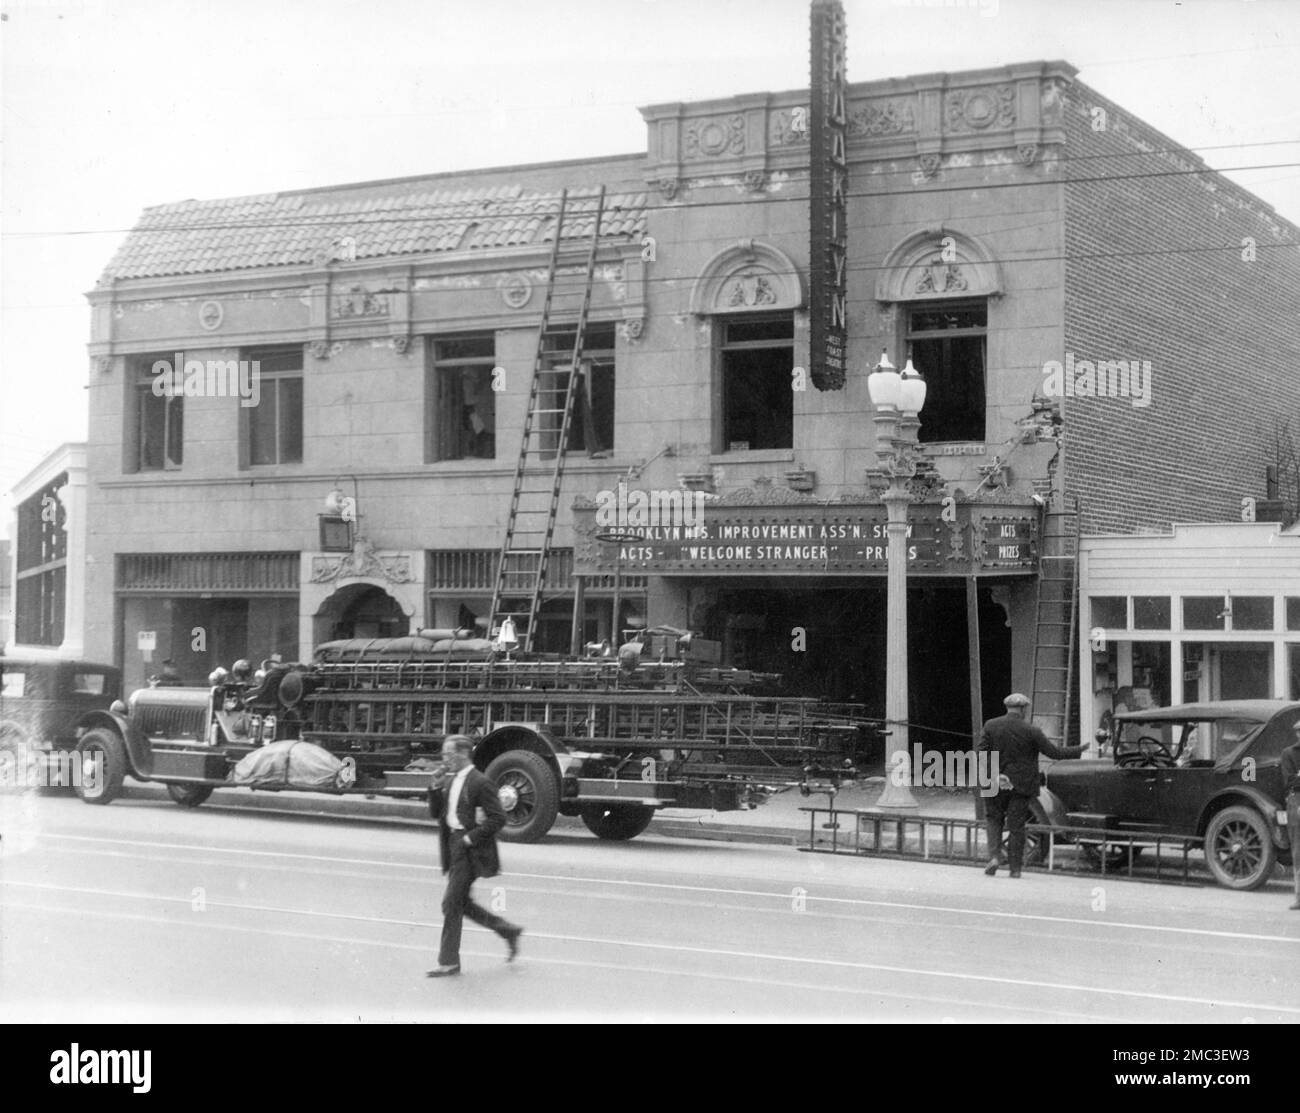 The Brooklyn Movie Theatre in Los Angeles which opened on December 24th 1925 after its criminal destruction / demolition with dynamite soaked in kerosine in June 1926 showing Fire Truck / Engine outside Stock Photo